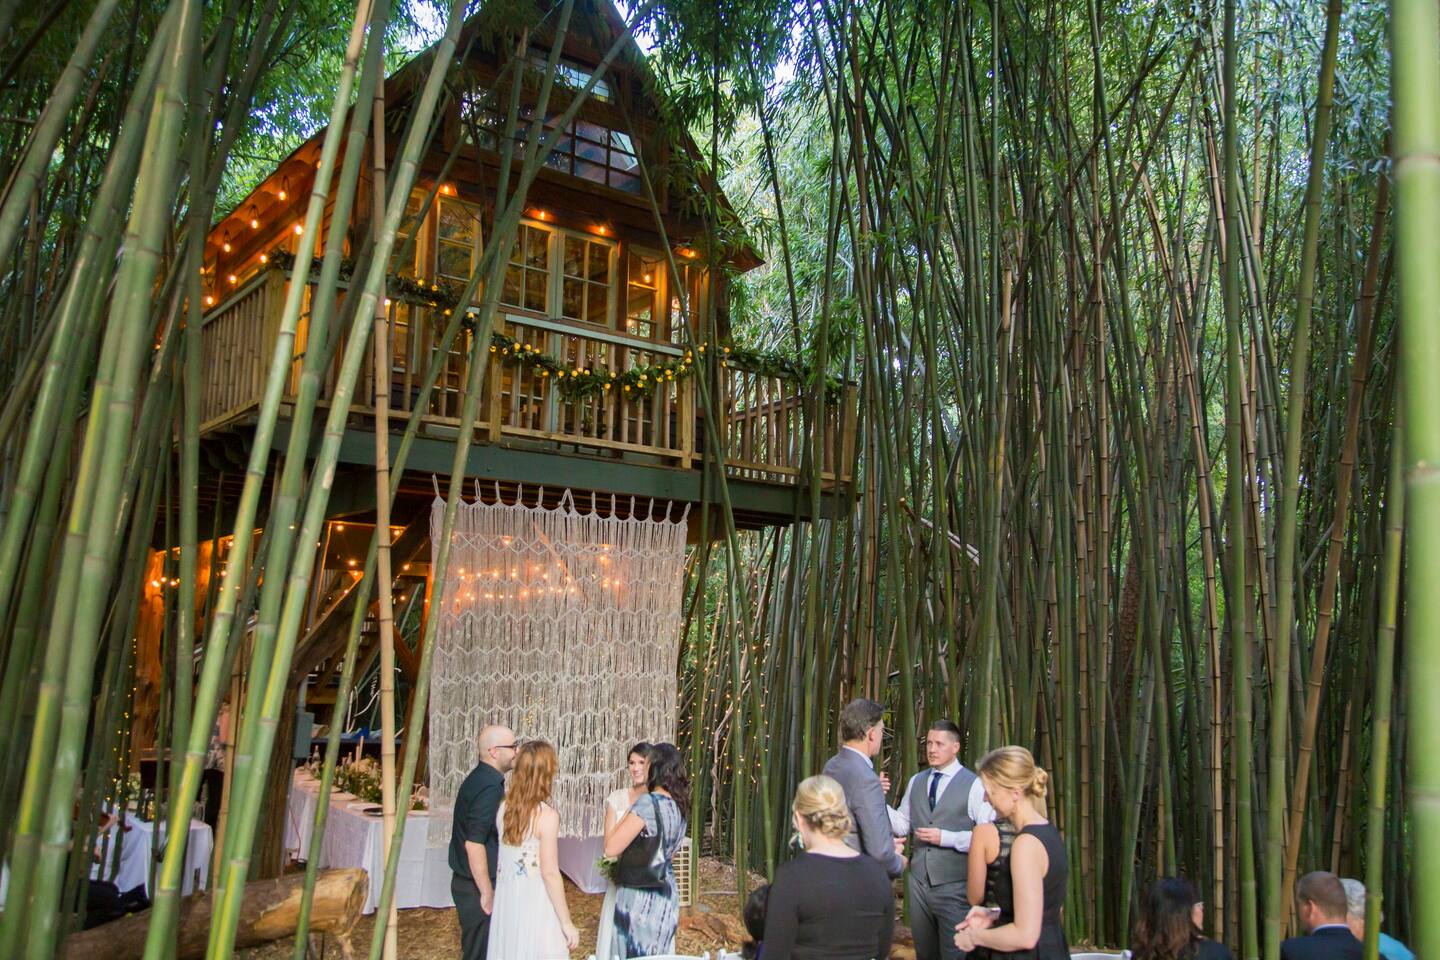 Atlanta Alpaca Treehouse In The Bamboo Forest Baumhauser Zur